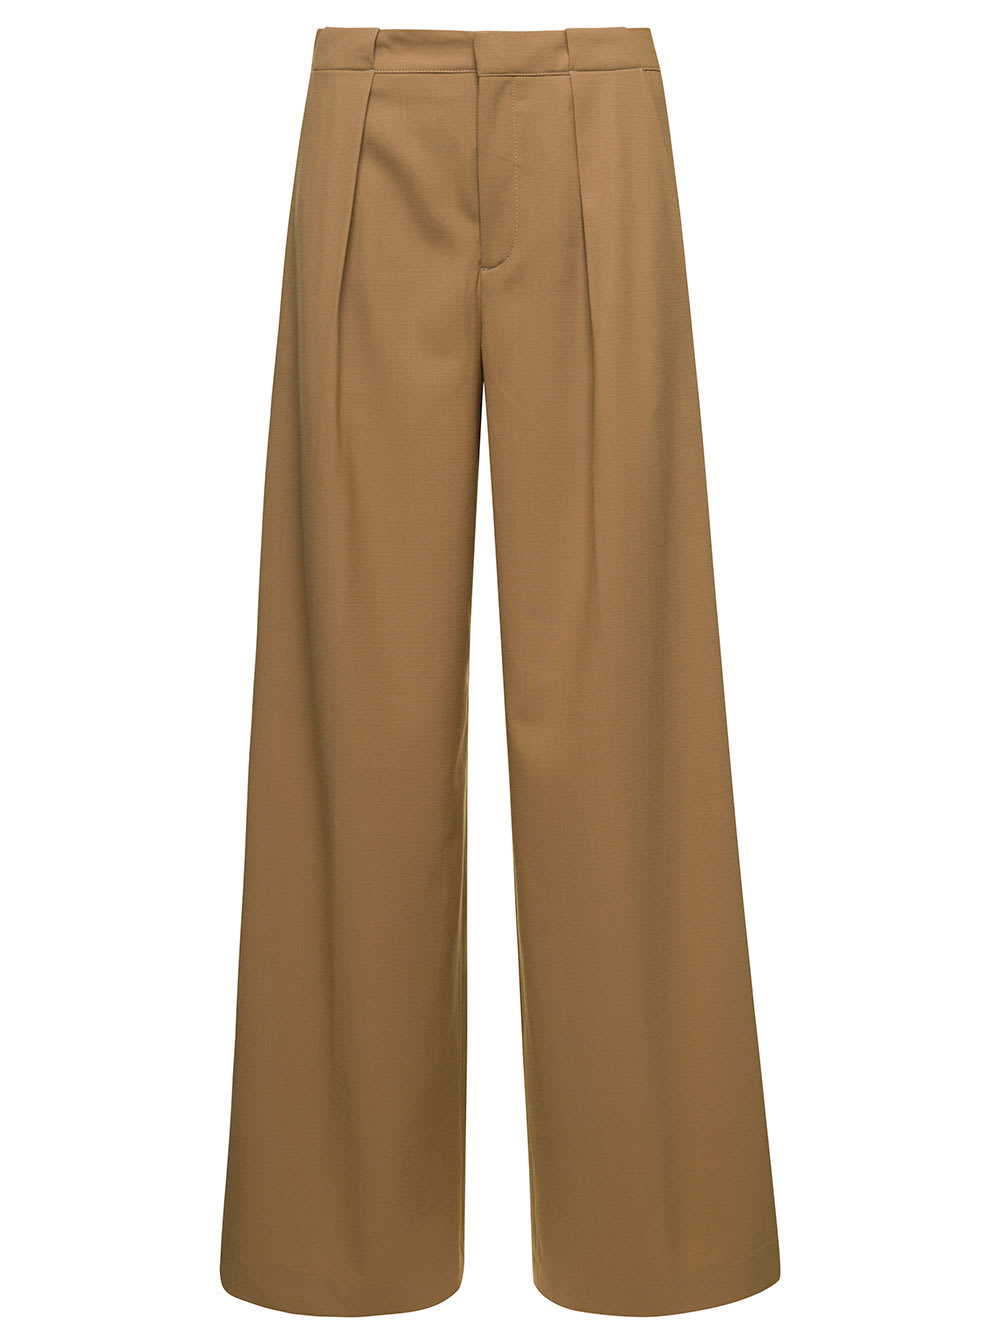 CLOSED BROWN LOOSE PANTS WITH CONCEALED FASTENING AND BELT LOOPS IN WOOL BLEND WOMAN